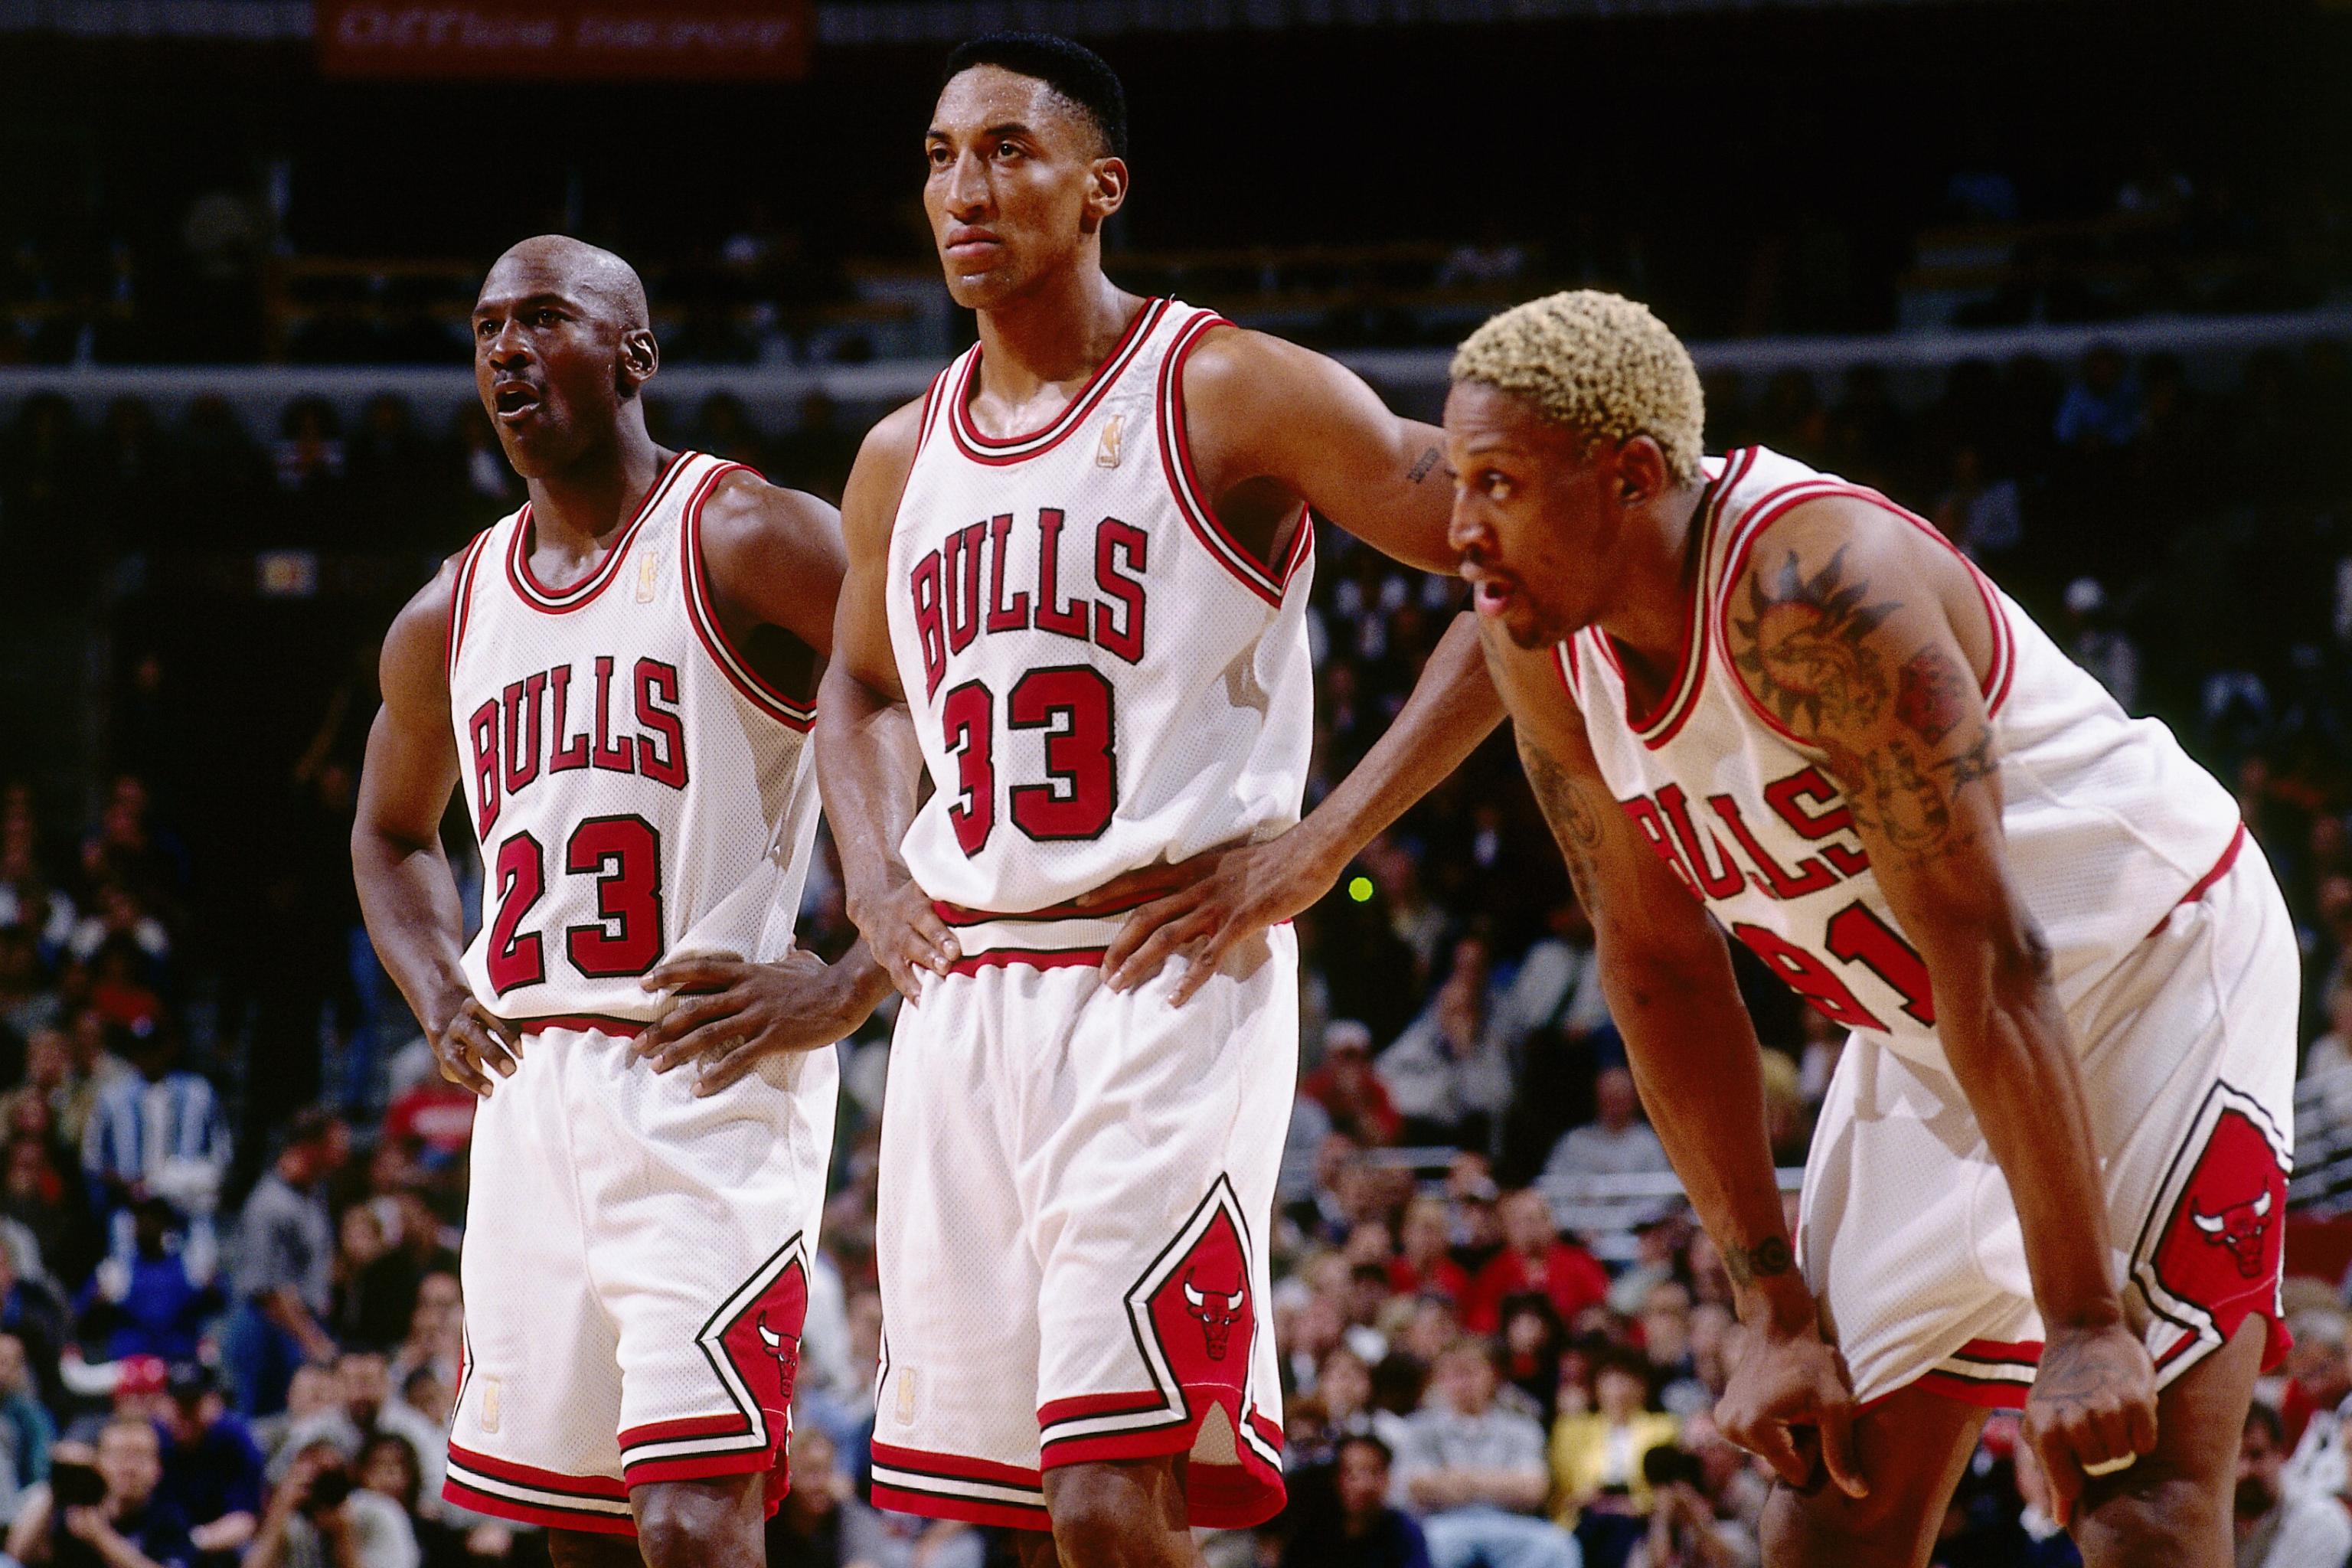 The 10 best moments of the 1997-98 Chicago Bulls season, including